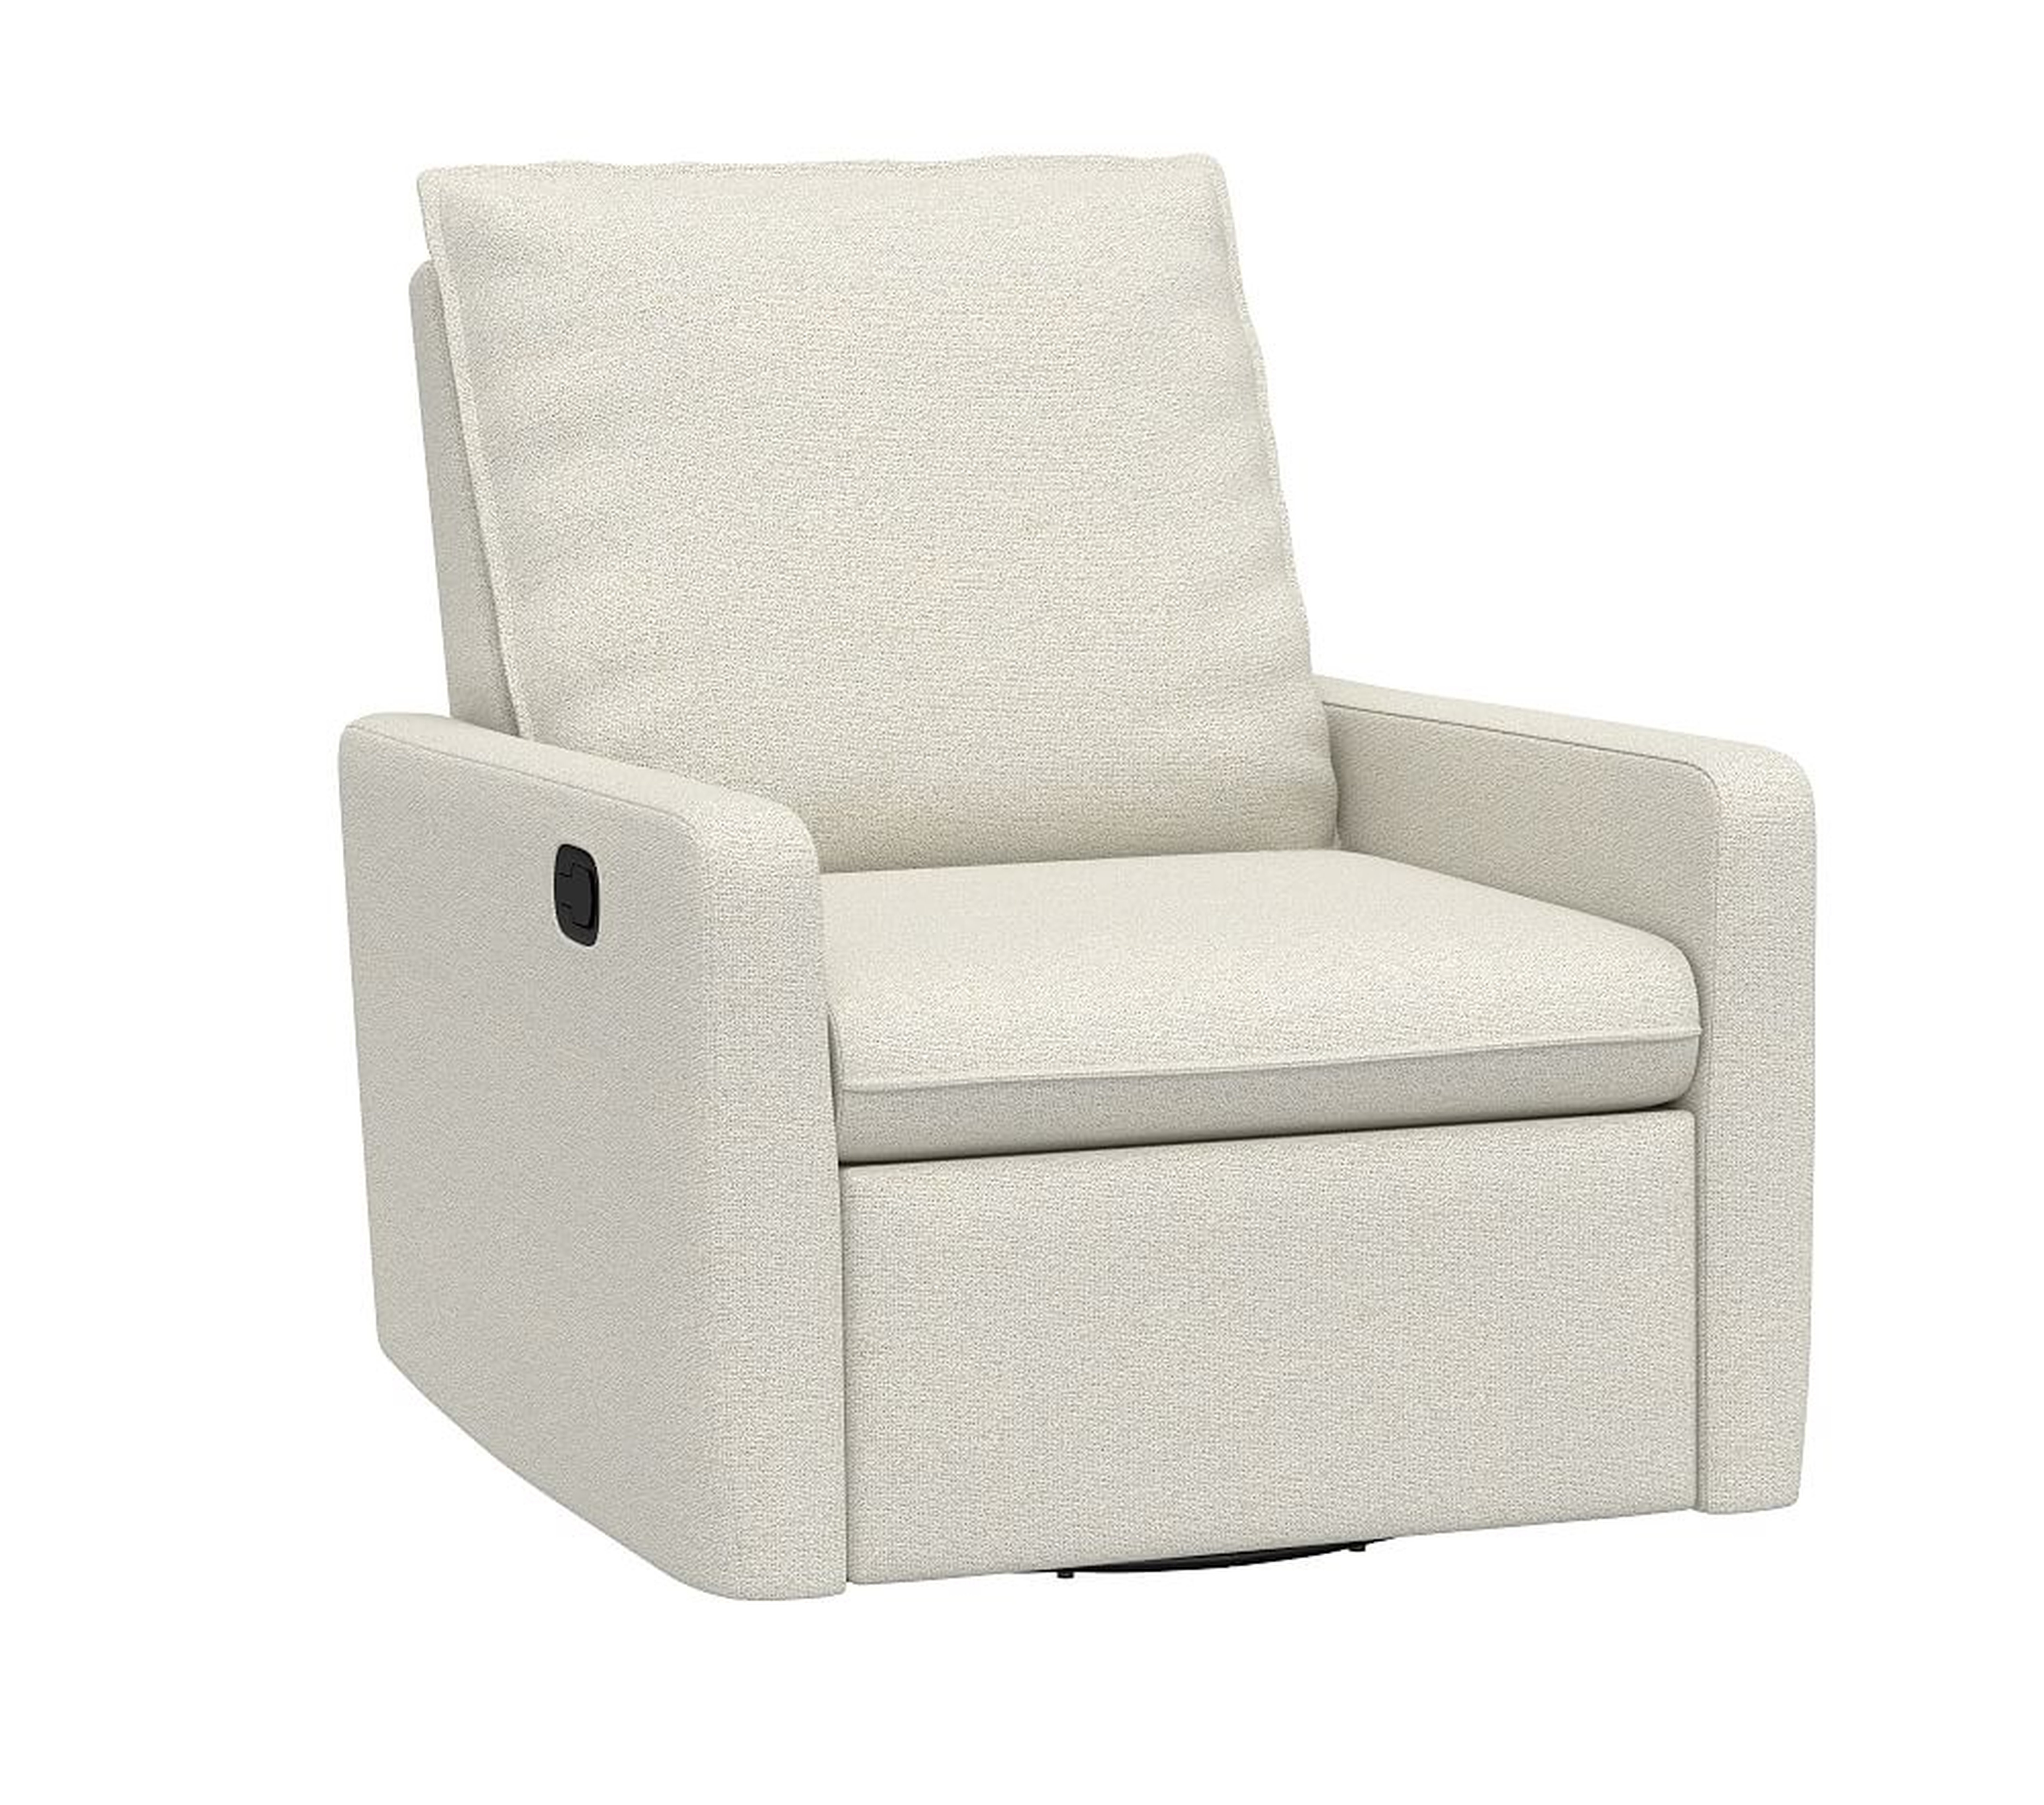 Paxton Manual Swivel Glider & Recliner, Performance Boucle, Oatmeal - Pottery Barn Kids